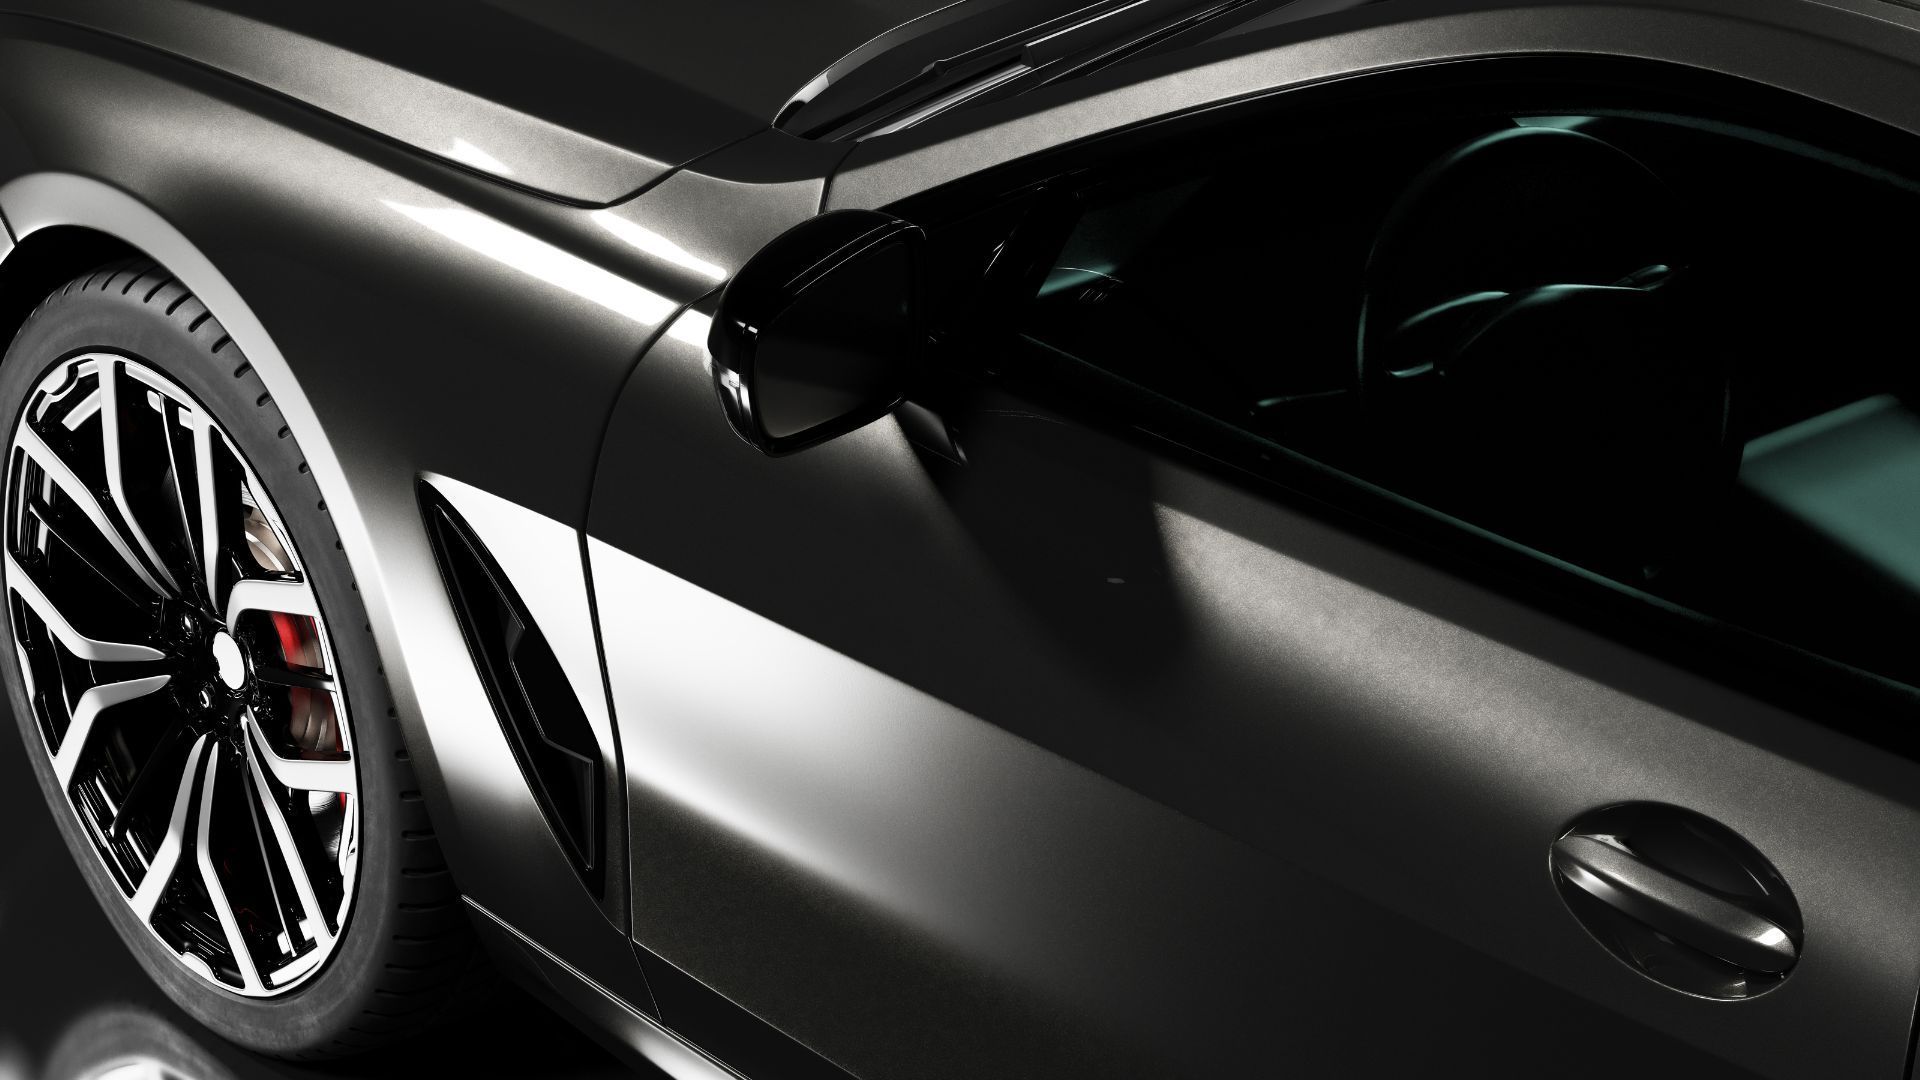 This close-up showcases the sleek details of a modern car with a matte finish in Duluth, GA. The dynamic angles of the car's body are highlighted by the contrasting glossy black side mirror and the intricate design of the alloy wheel. The sheen on the car's surface reflects the meticulous detailing work done on it. The photo captures the essence of luxury automotive design with a focus on the textures and materials that convey sophistication and high performance.